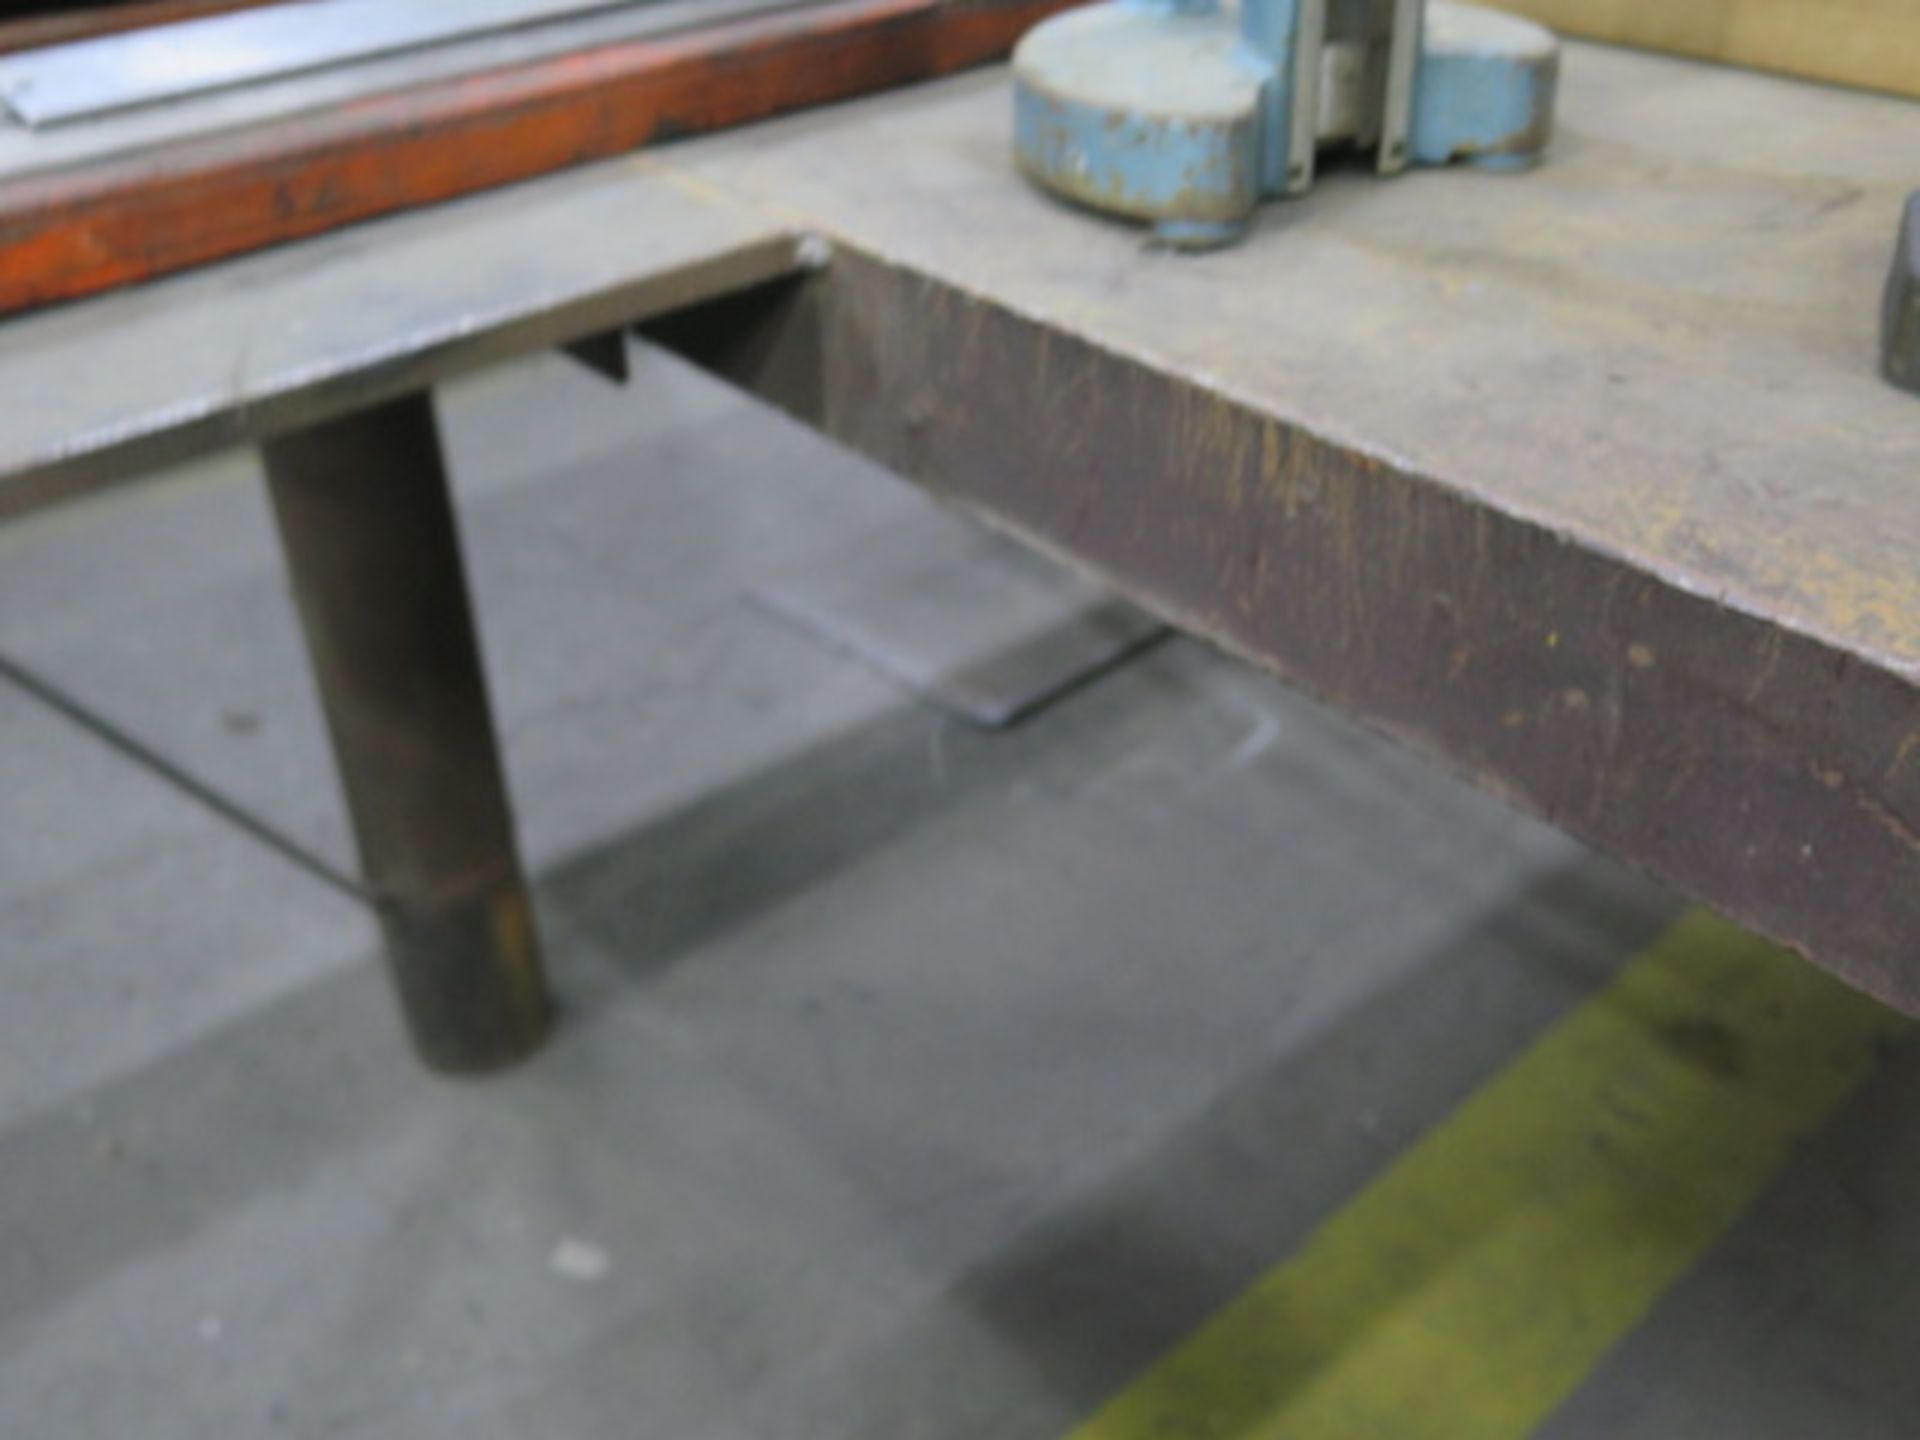 66" x 66" x 2 3/4" Steel Table (SOLD AS-IS - NO WARRANTY) - Image 3 of 5